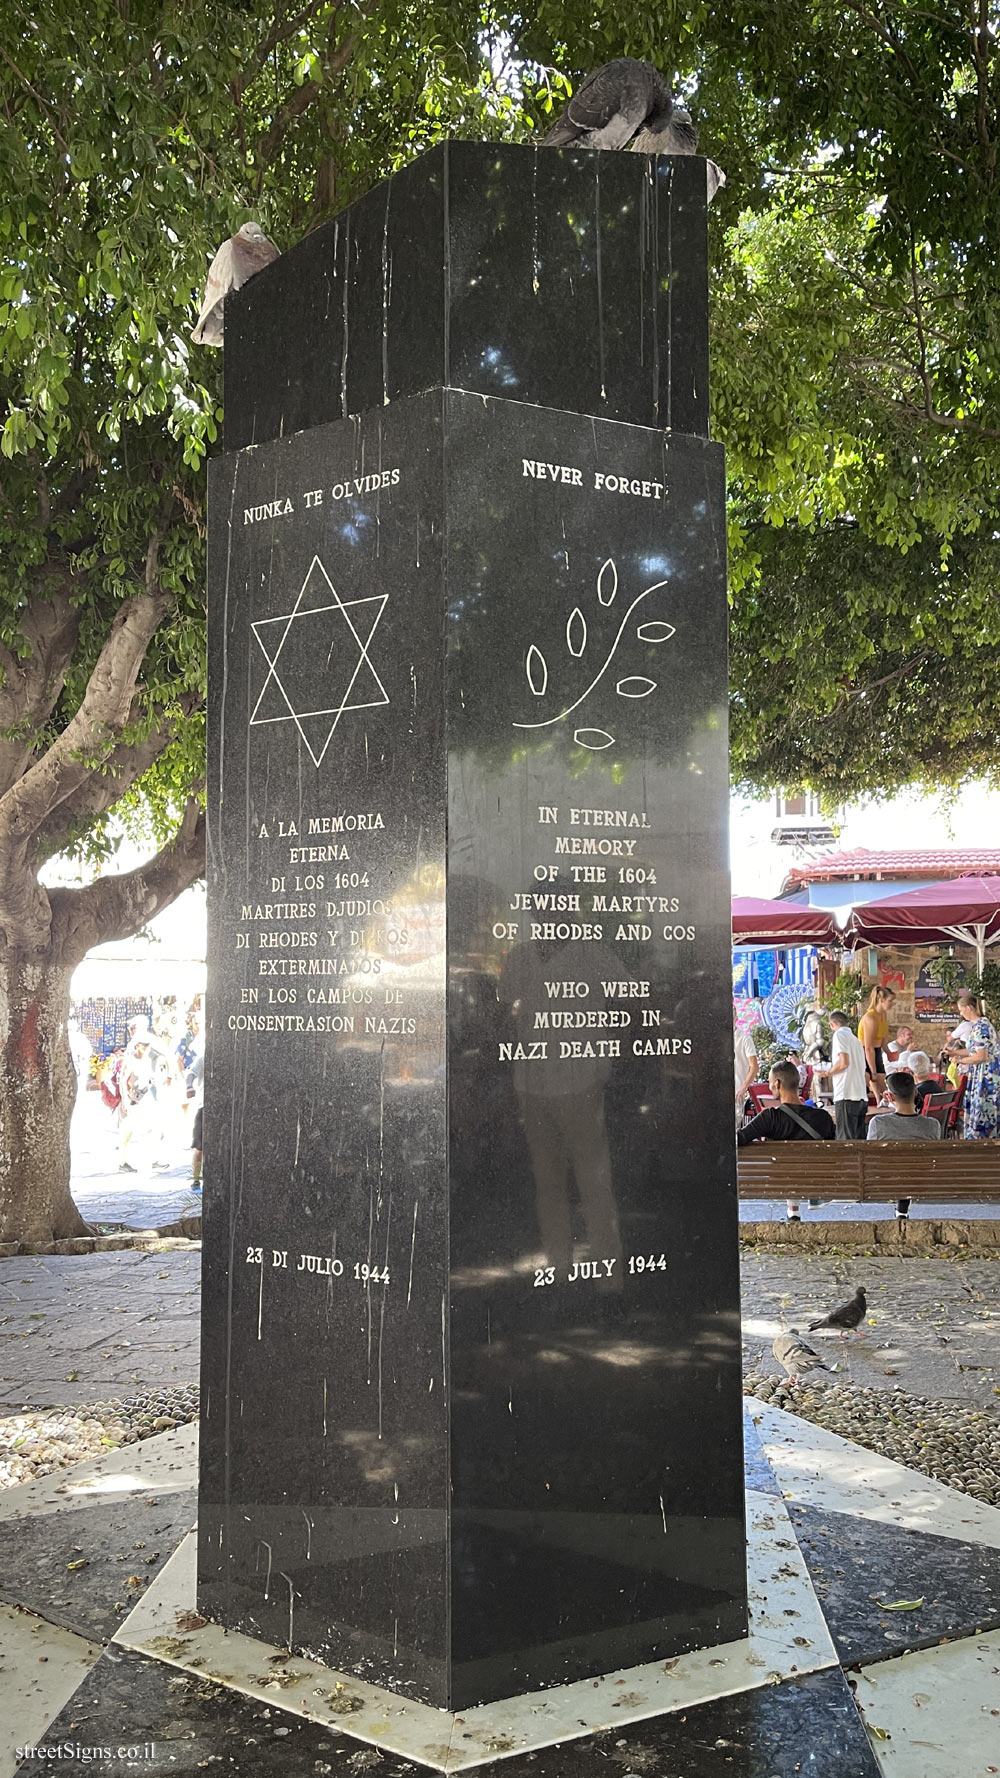 Rhodes (Rhodos) - a memorial to the Jews of Rhodes who perished in the Holocaust